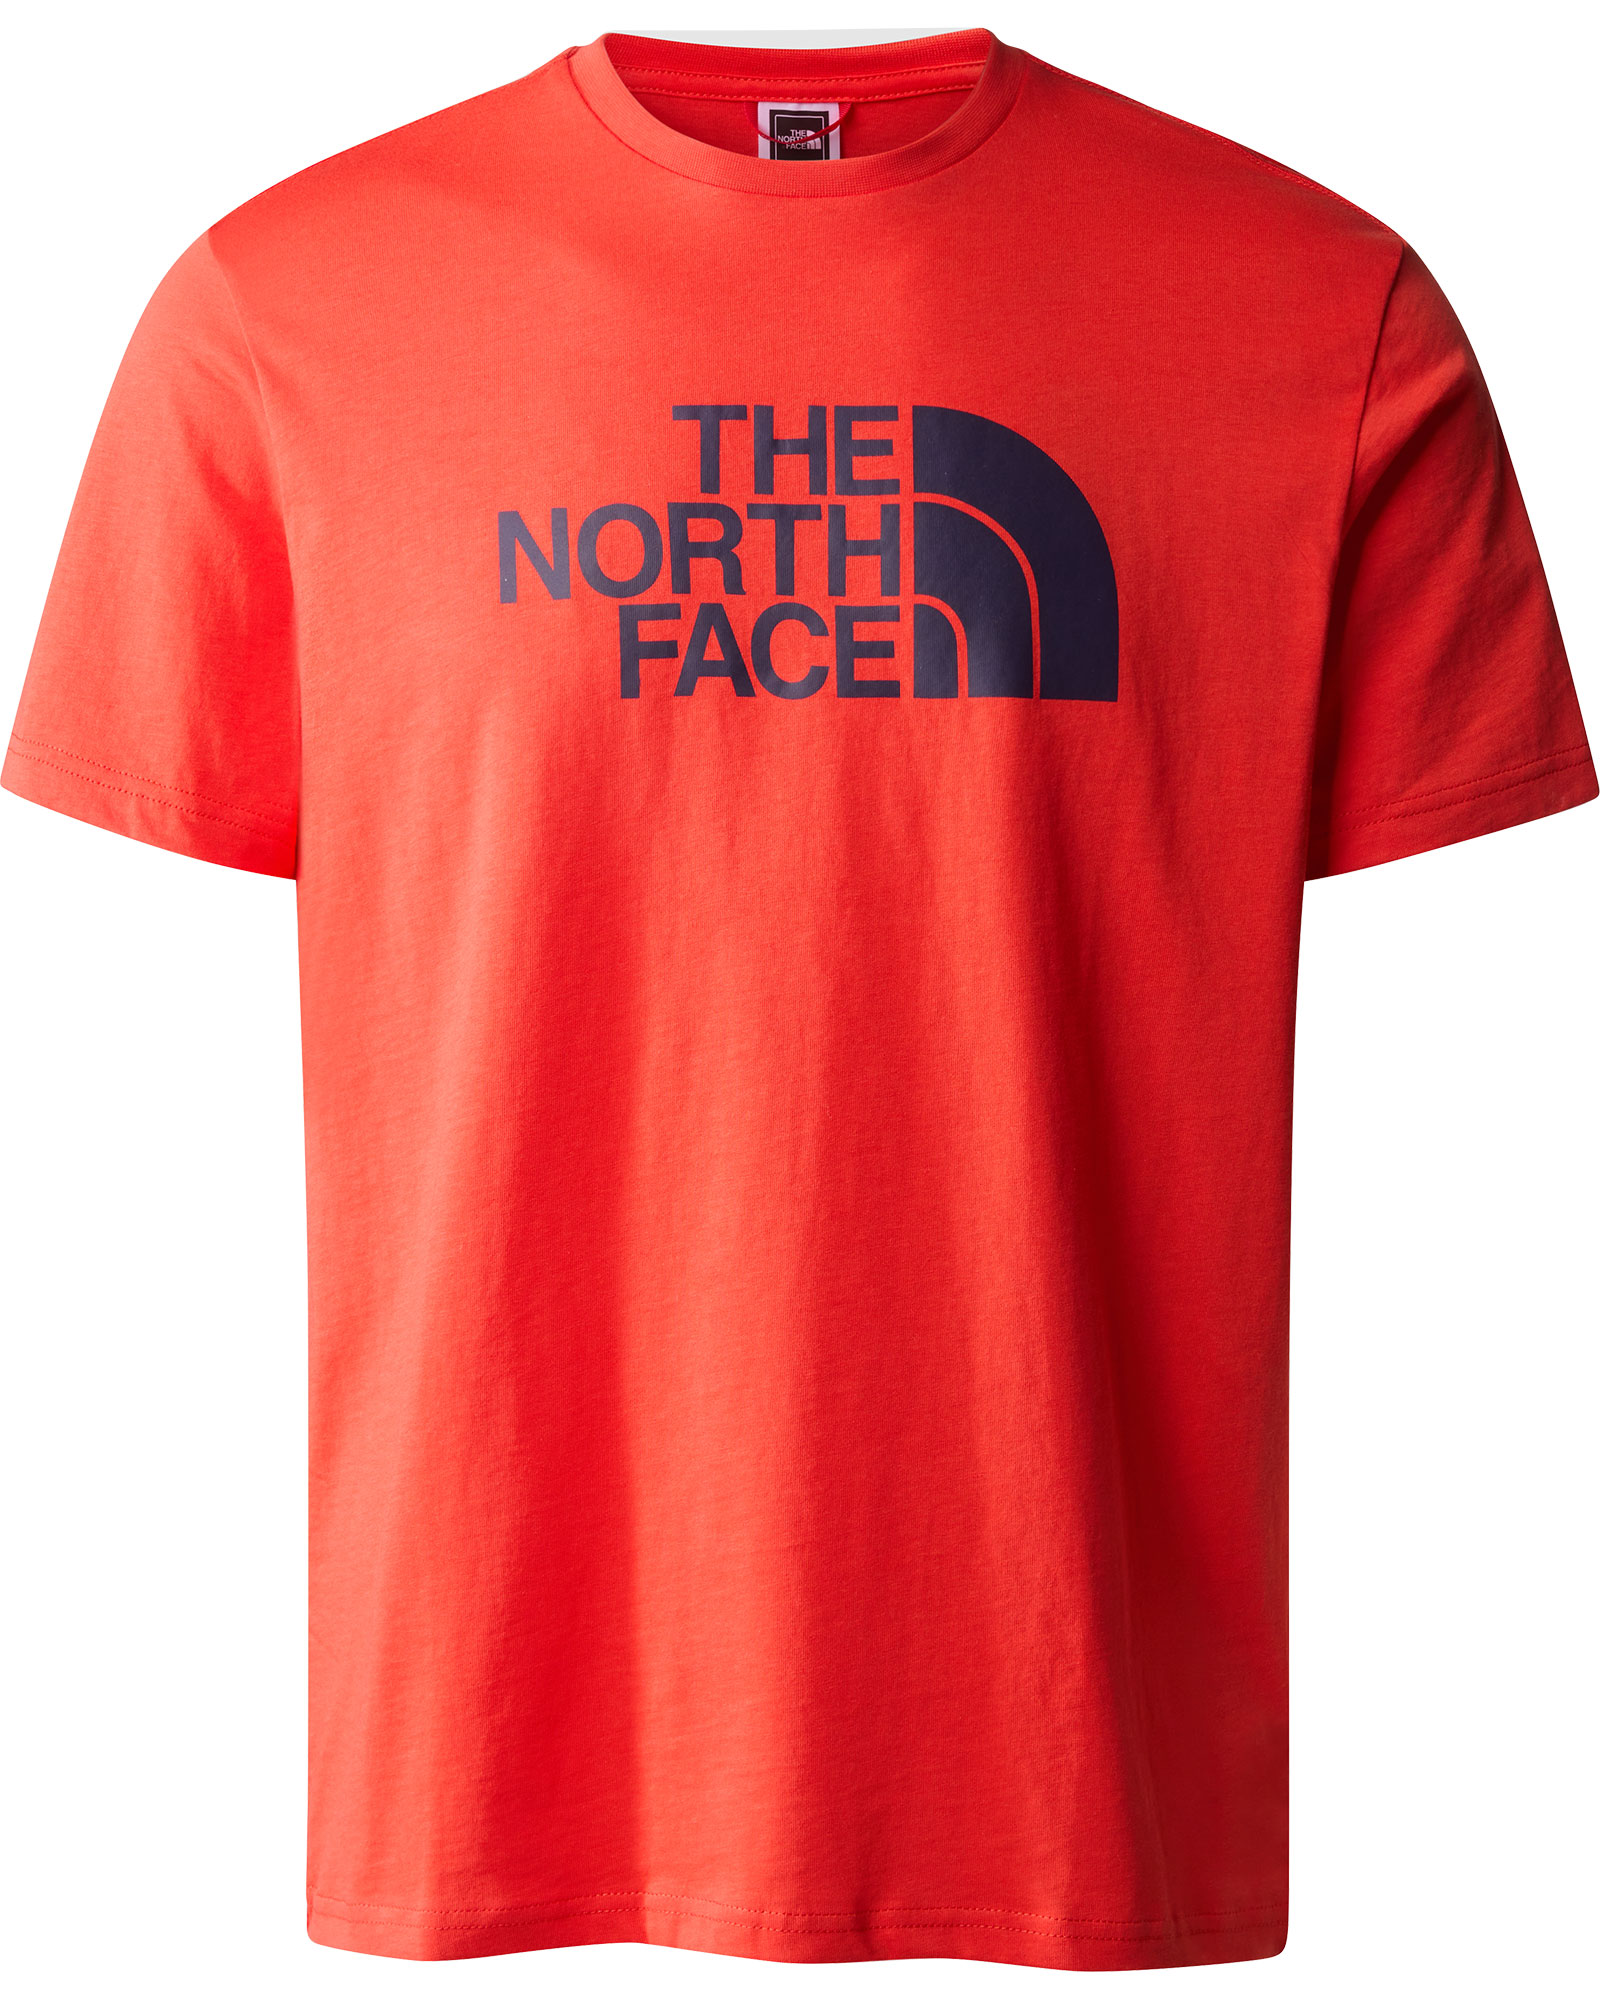 The North Face Easy Men’s T Shirt - Fiery Red S